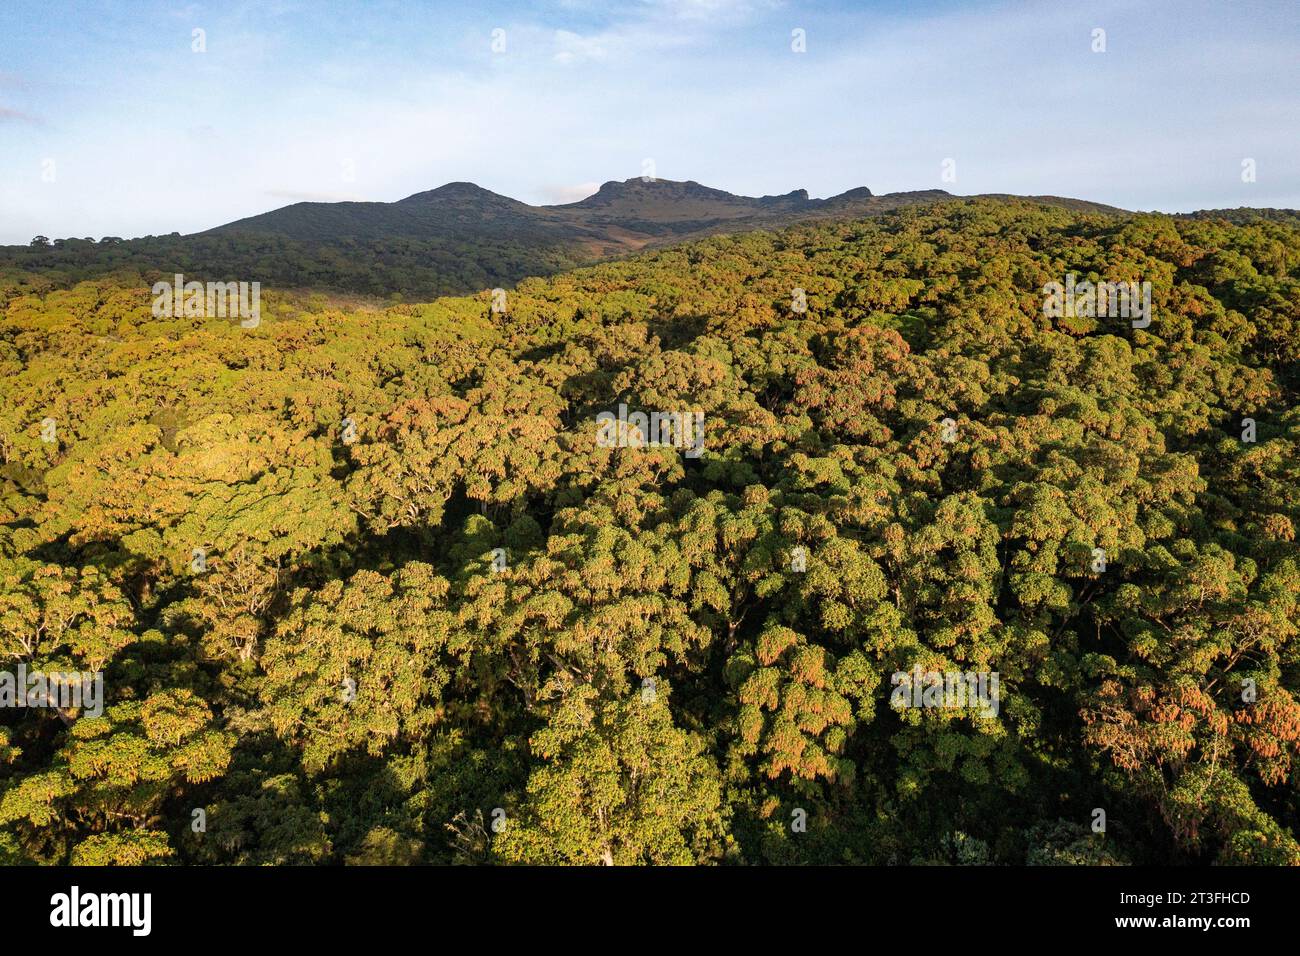 Kenya, Aberdare national park, Hagenia abyssinica forest (aerial view) Stock Photo